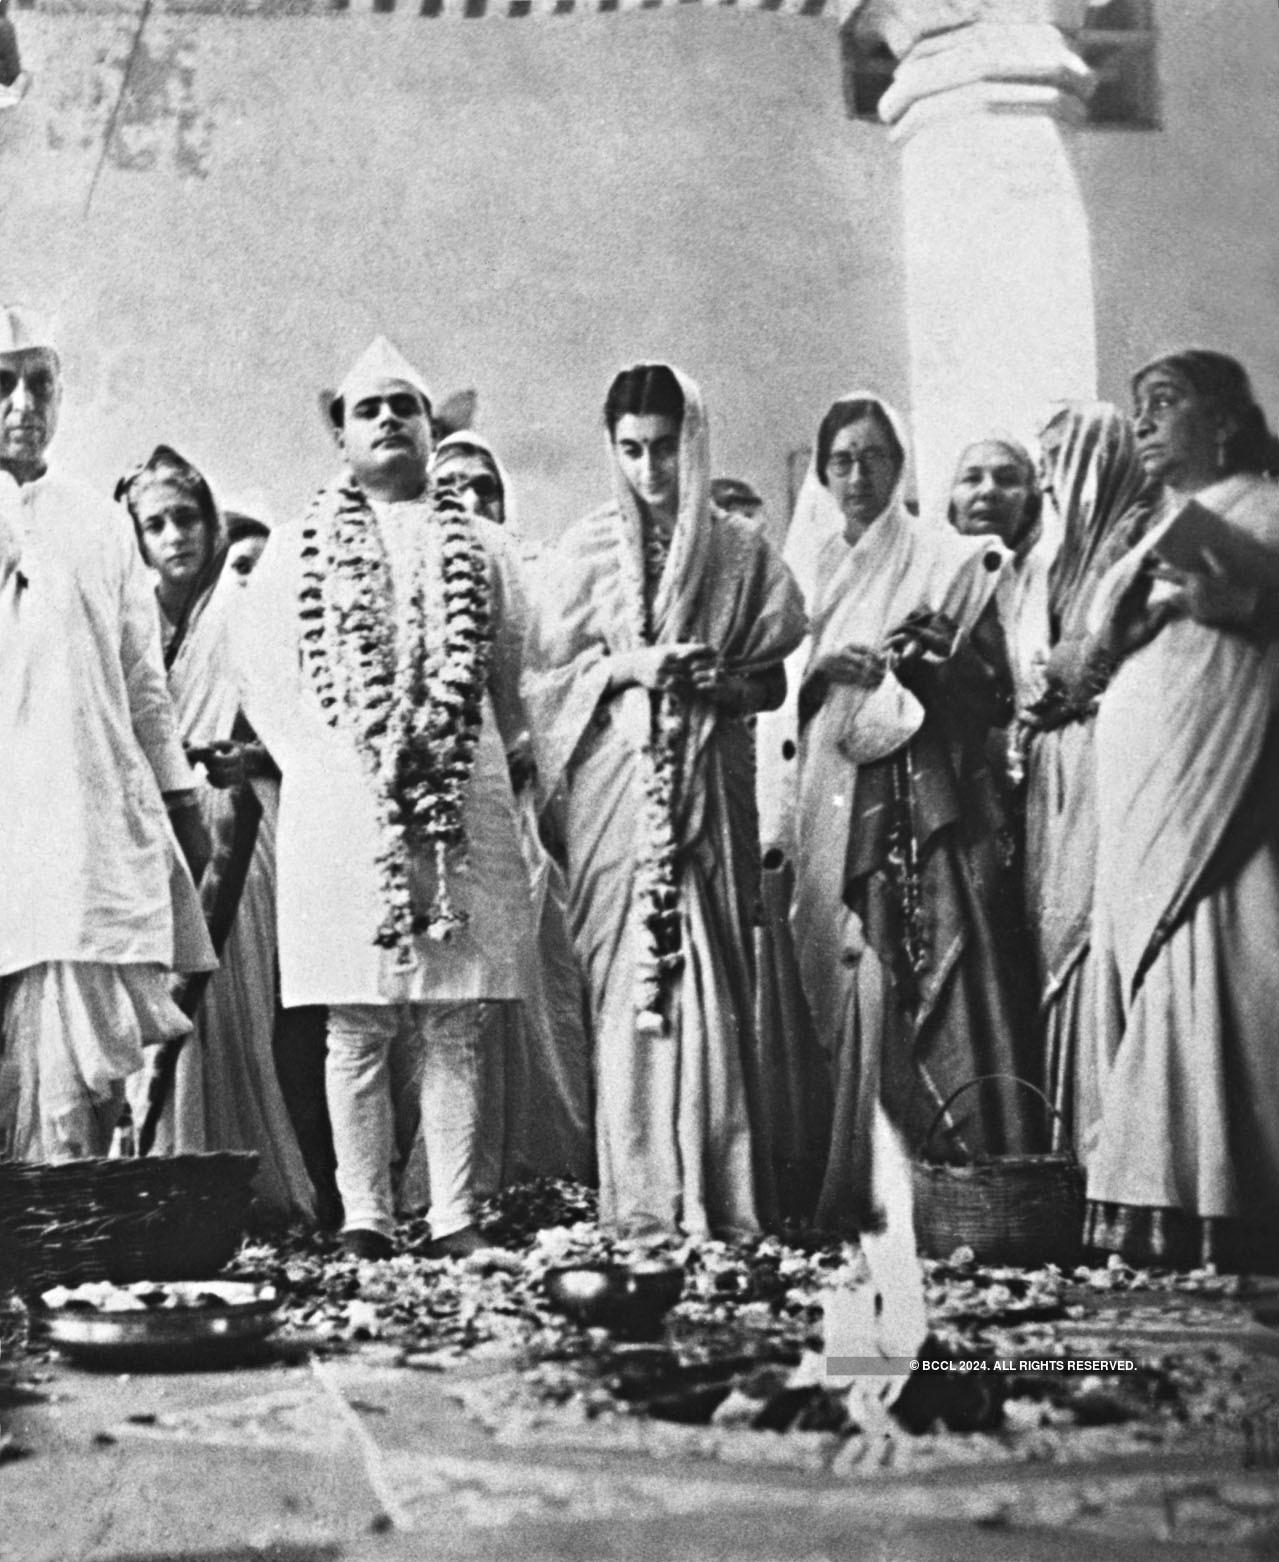 Independence Day 2018: Iconic photos from Indian history